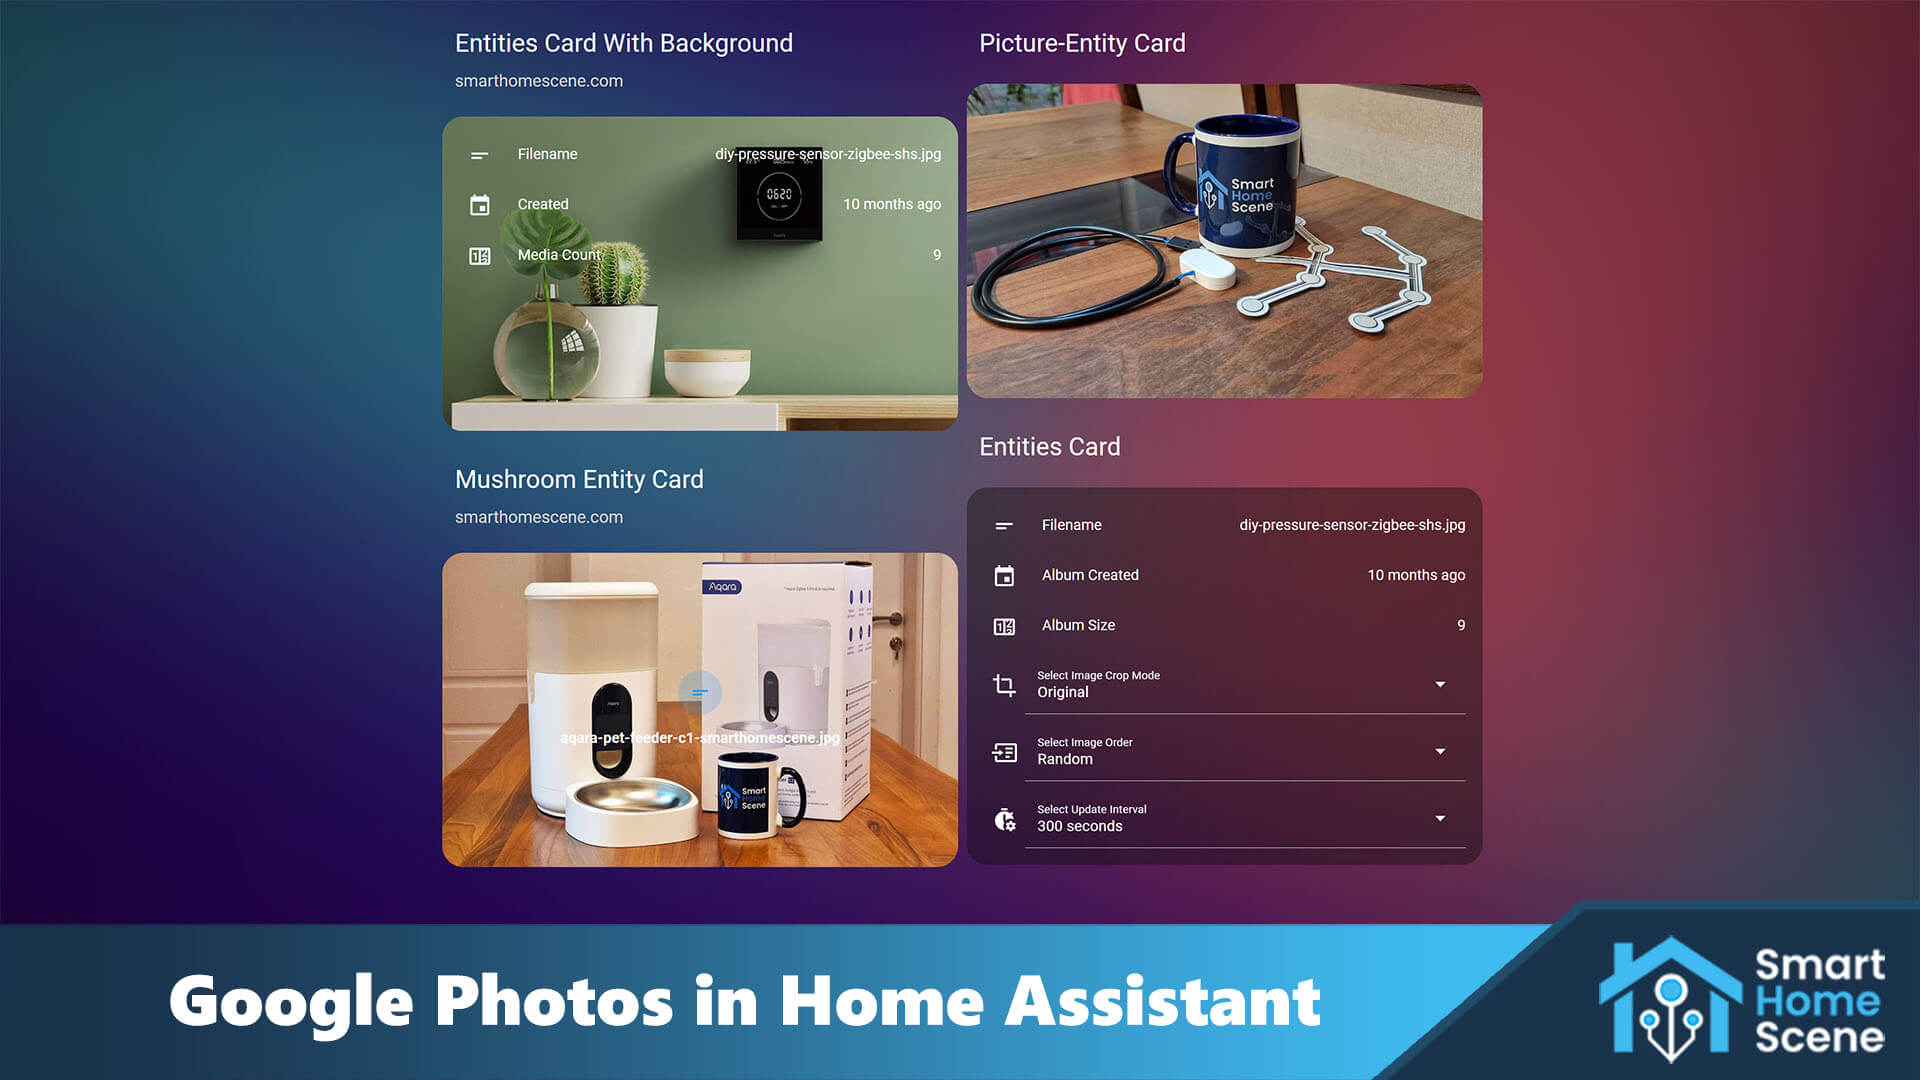 Google Photos Home Assistant SmartHomeScene Tutorial and How-To